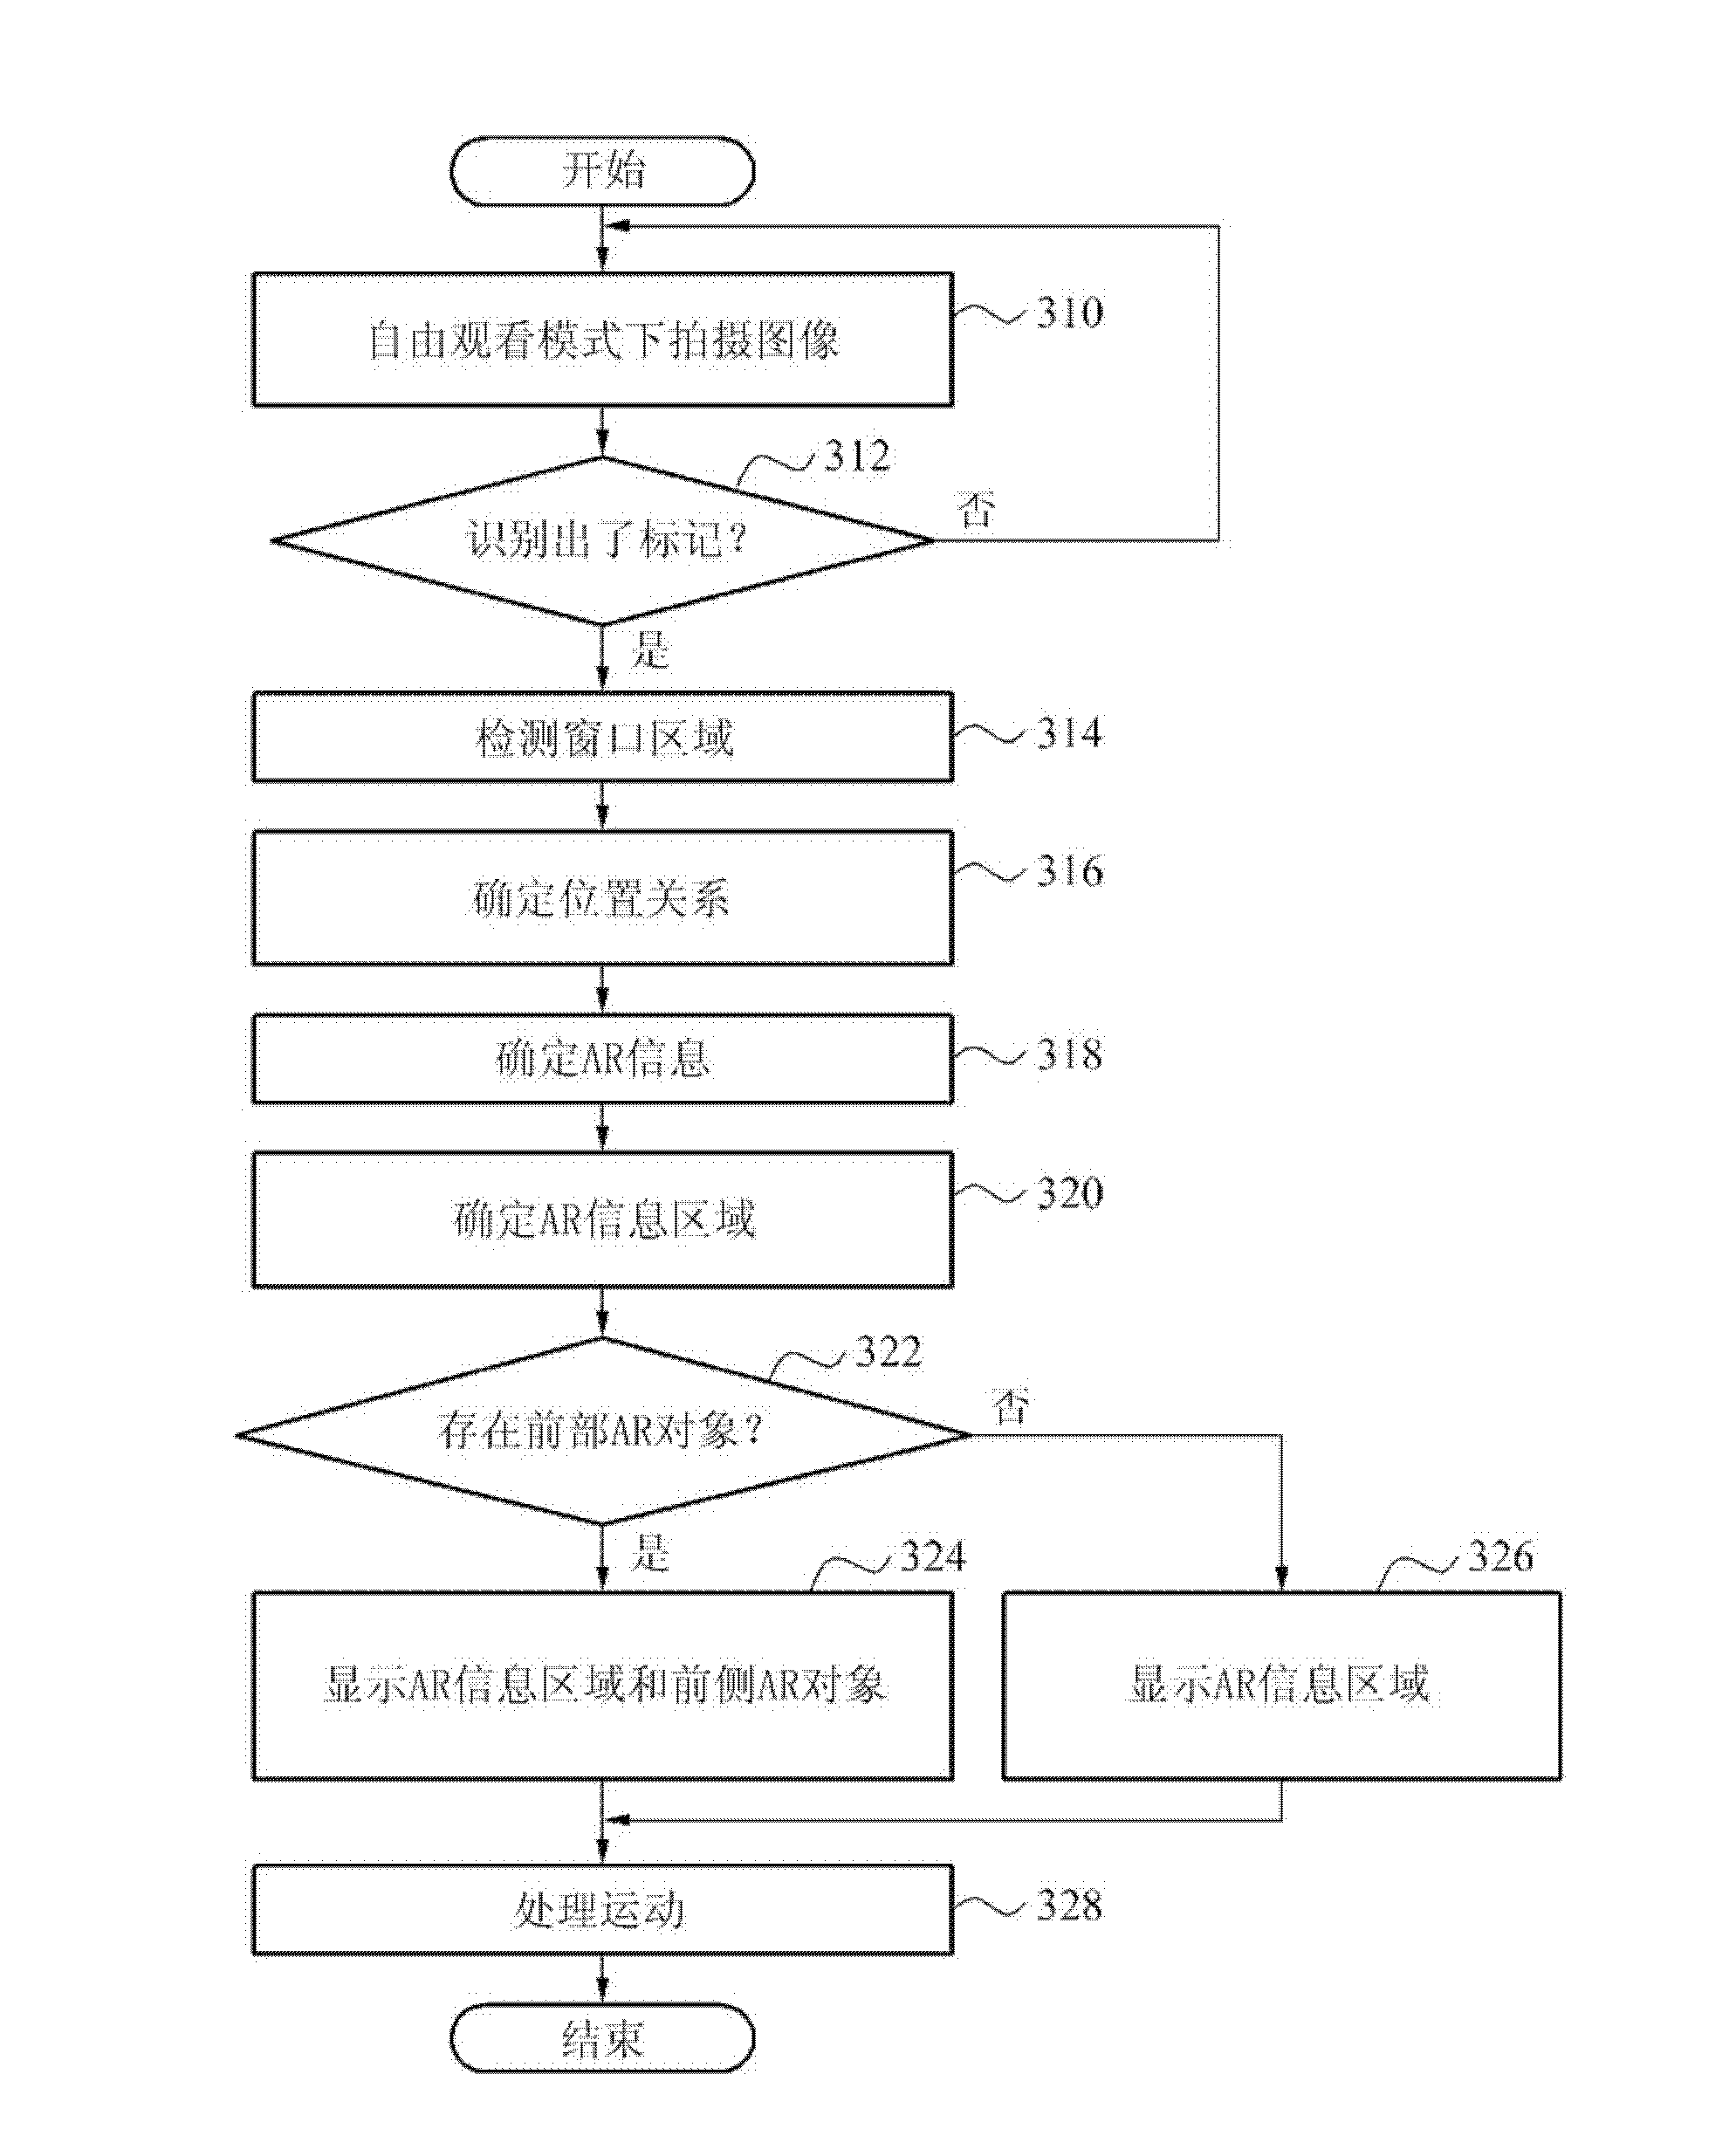 Augmented reality apparatus and method of windows form